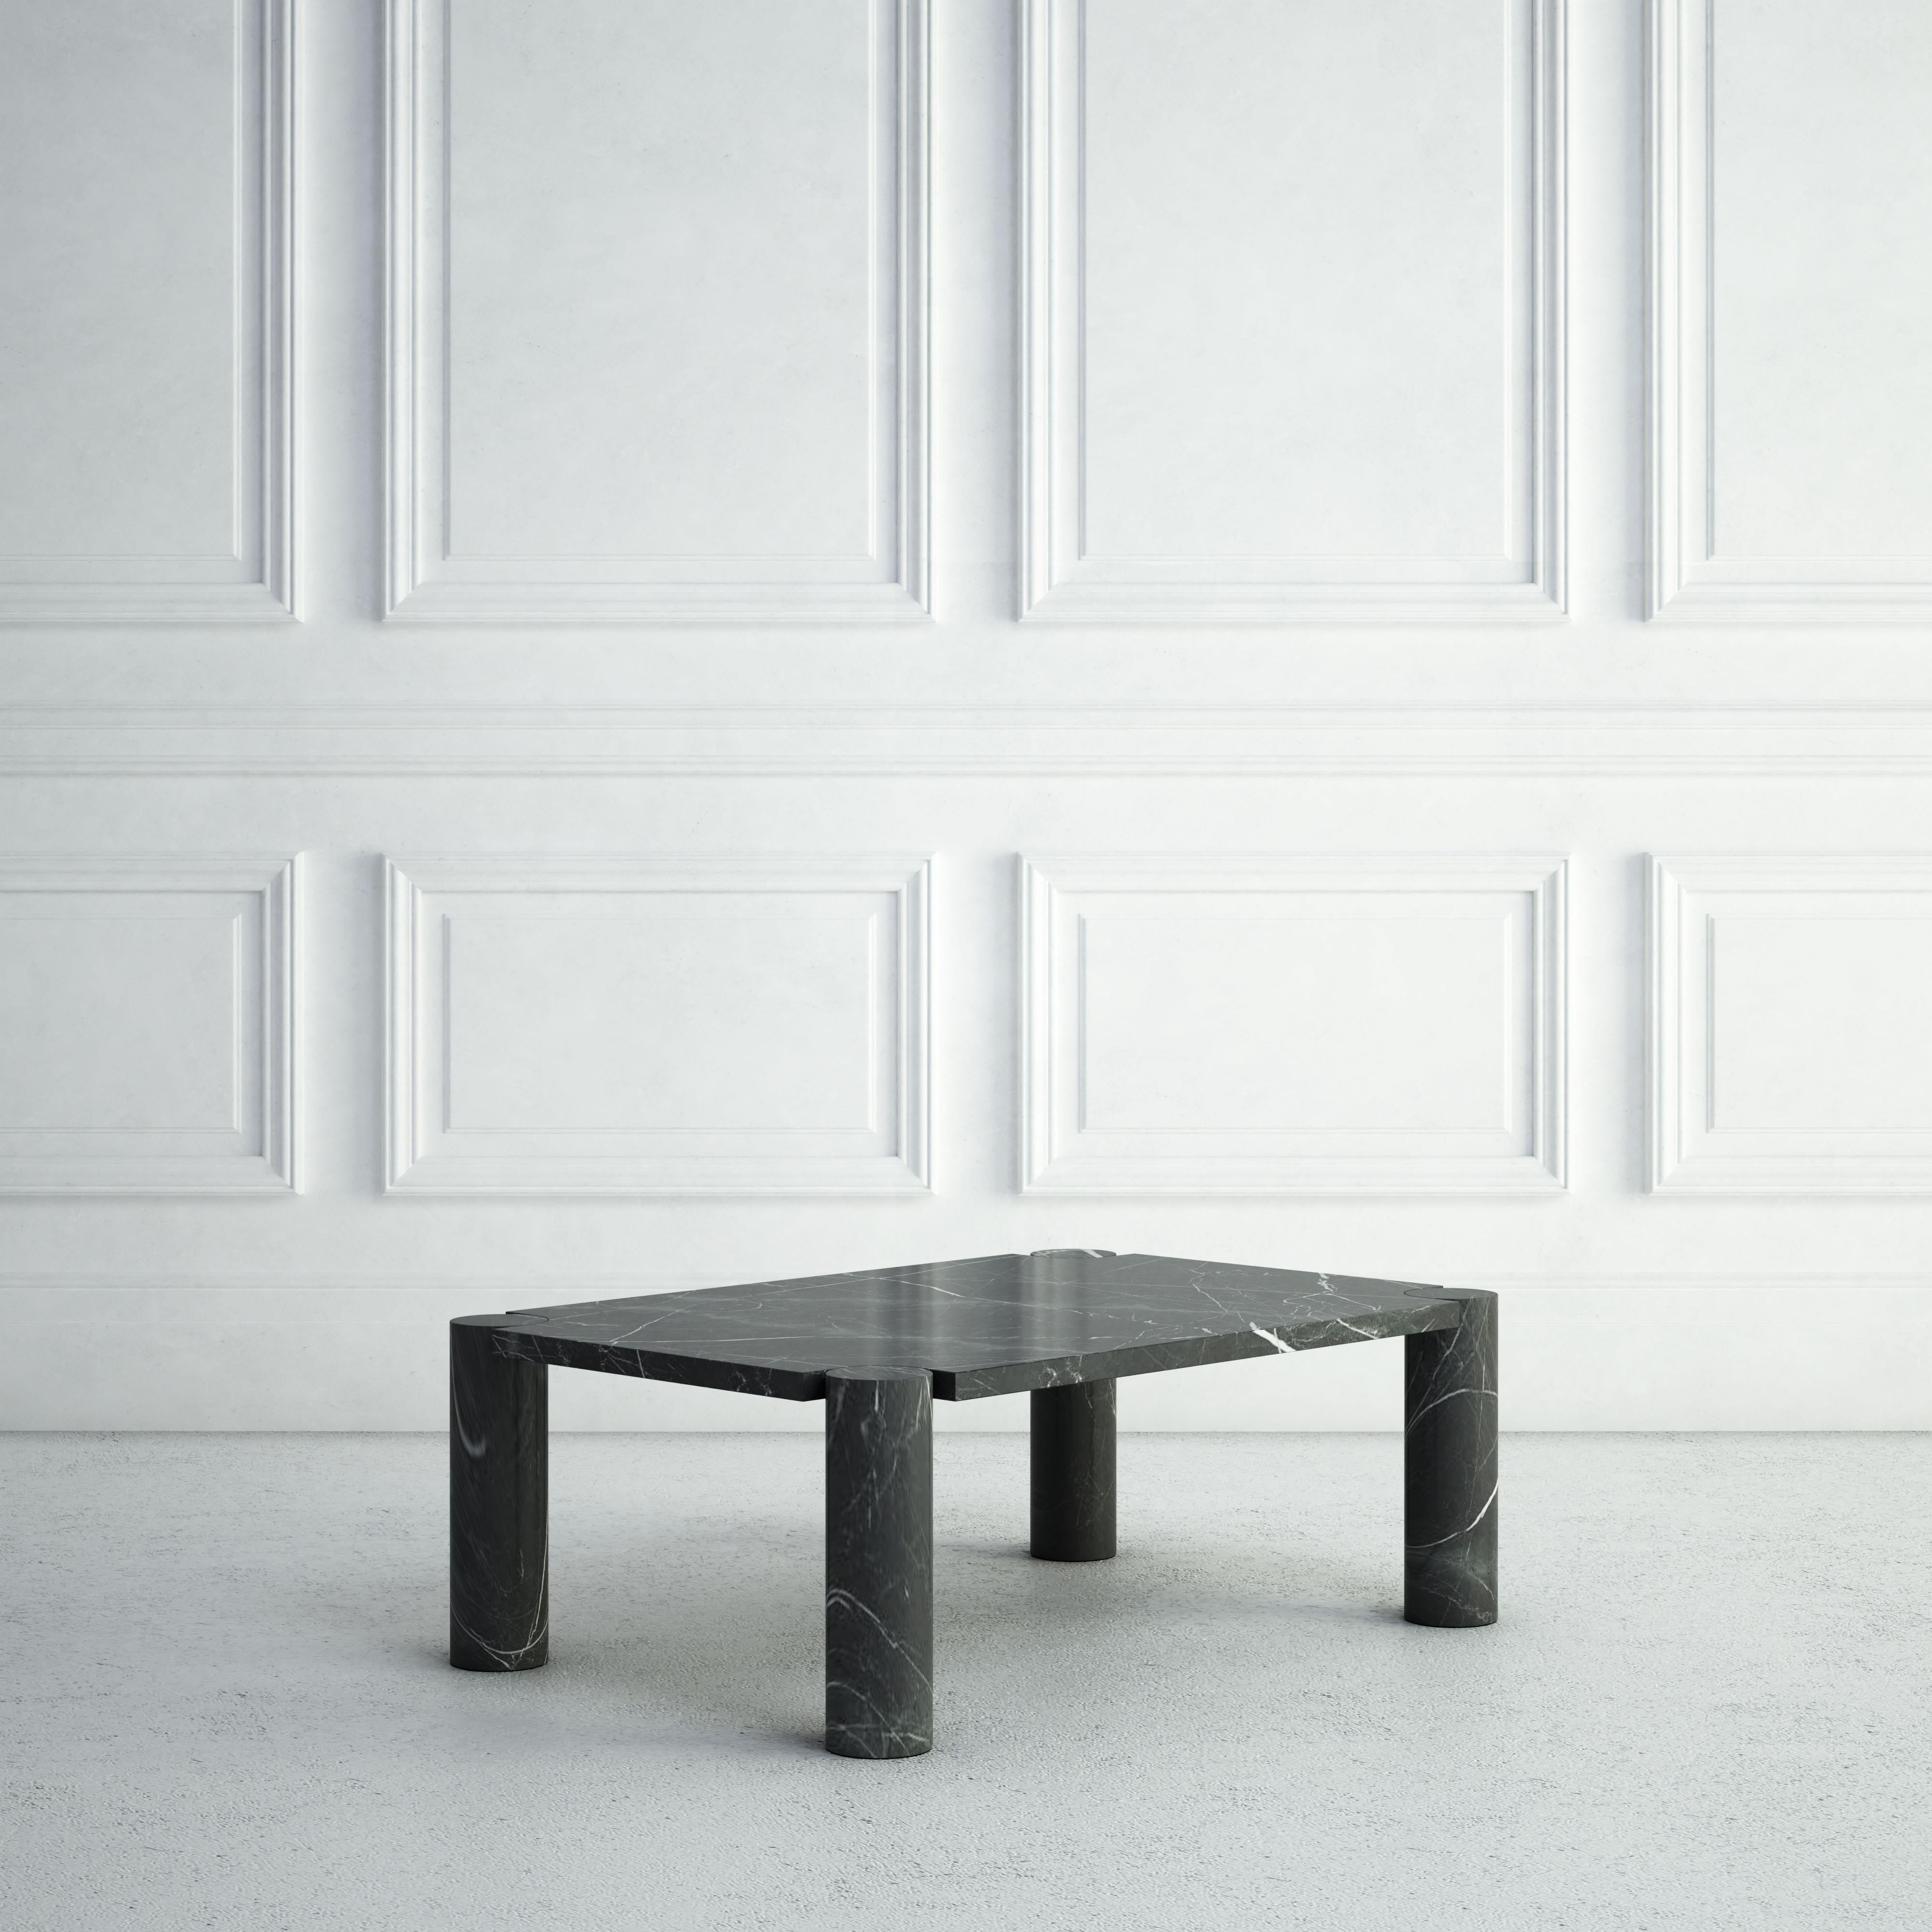 The Pauline is a traditional stone coffee table with a twist:  its 4 legs are all perfectly-turned cylinders. The 4 stone legs support a slim rectangular stone top that notches around the tops of the legs.  The same stone is used throughout.   The